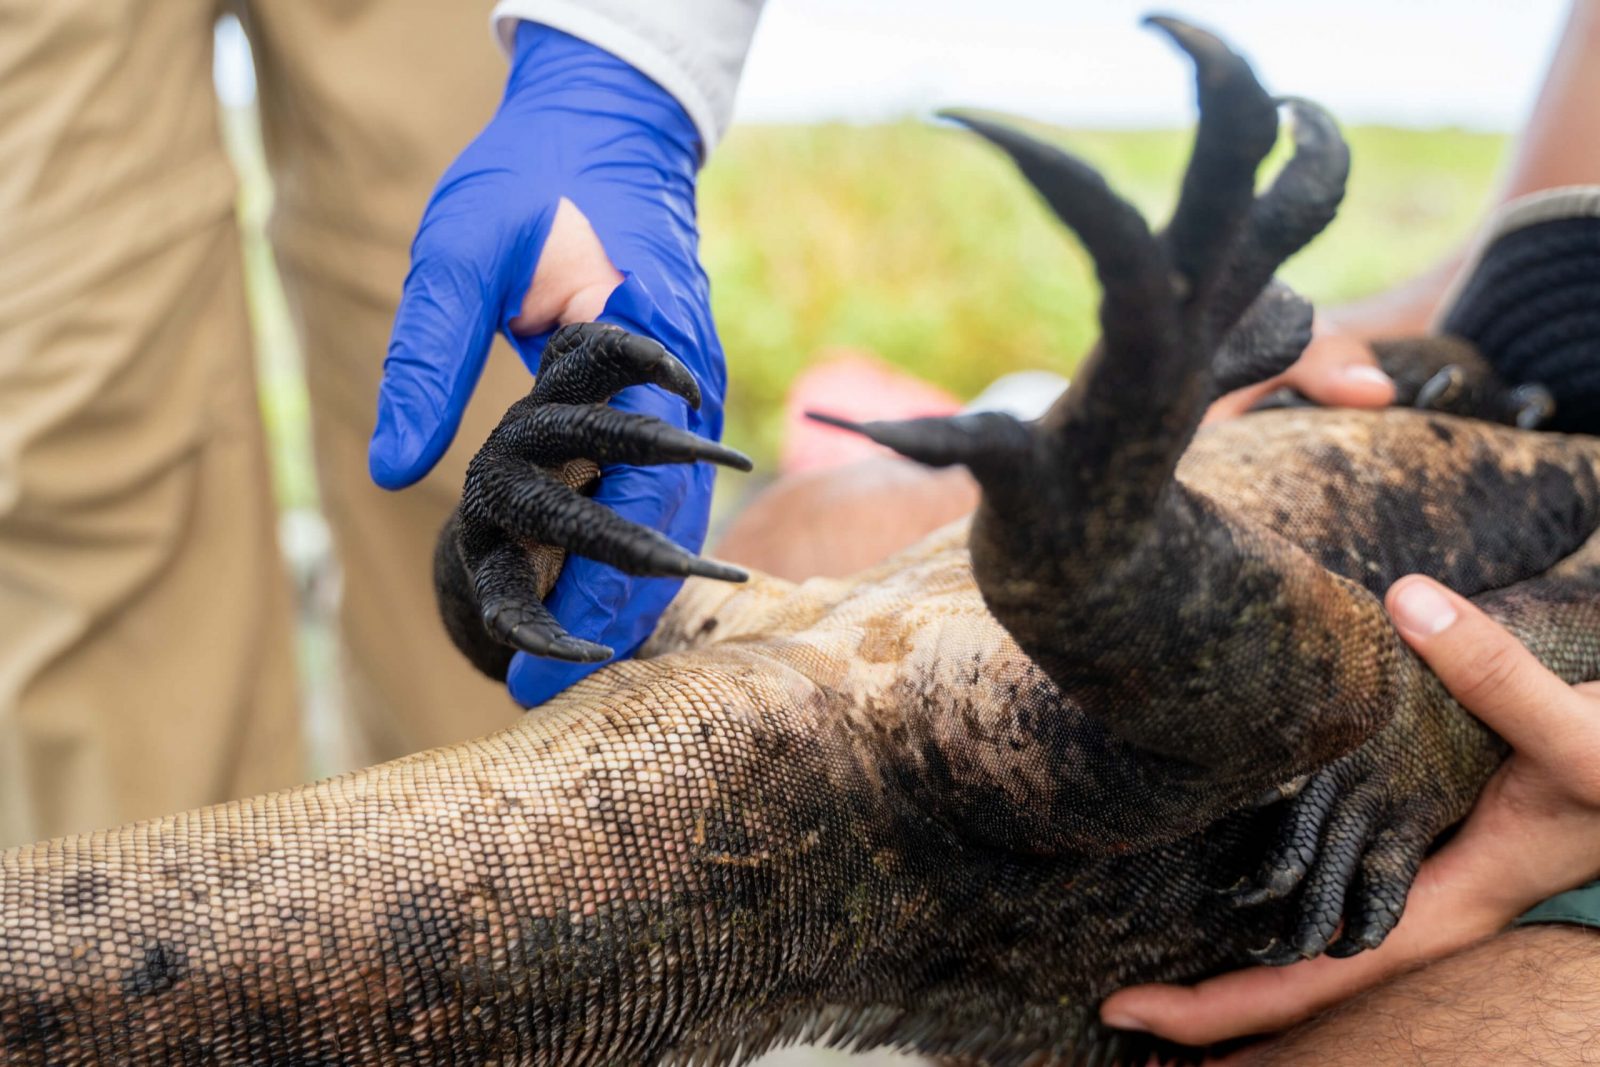 A researcher's gloved hand holding the back foot of a marine iguana who is being held on its back by the other researcher.